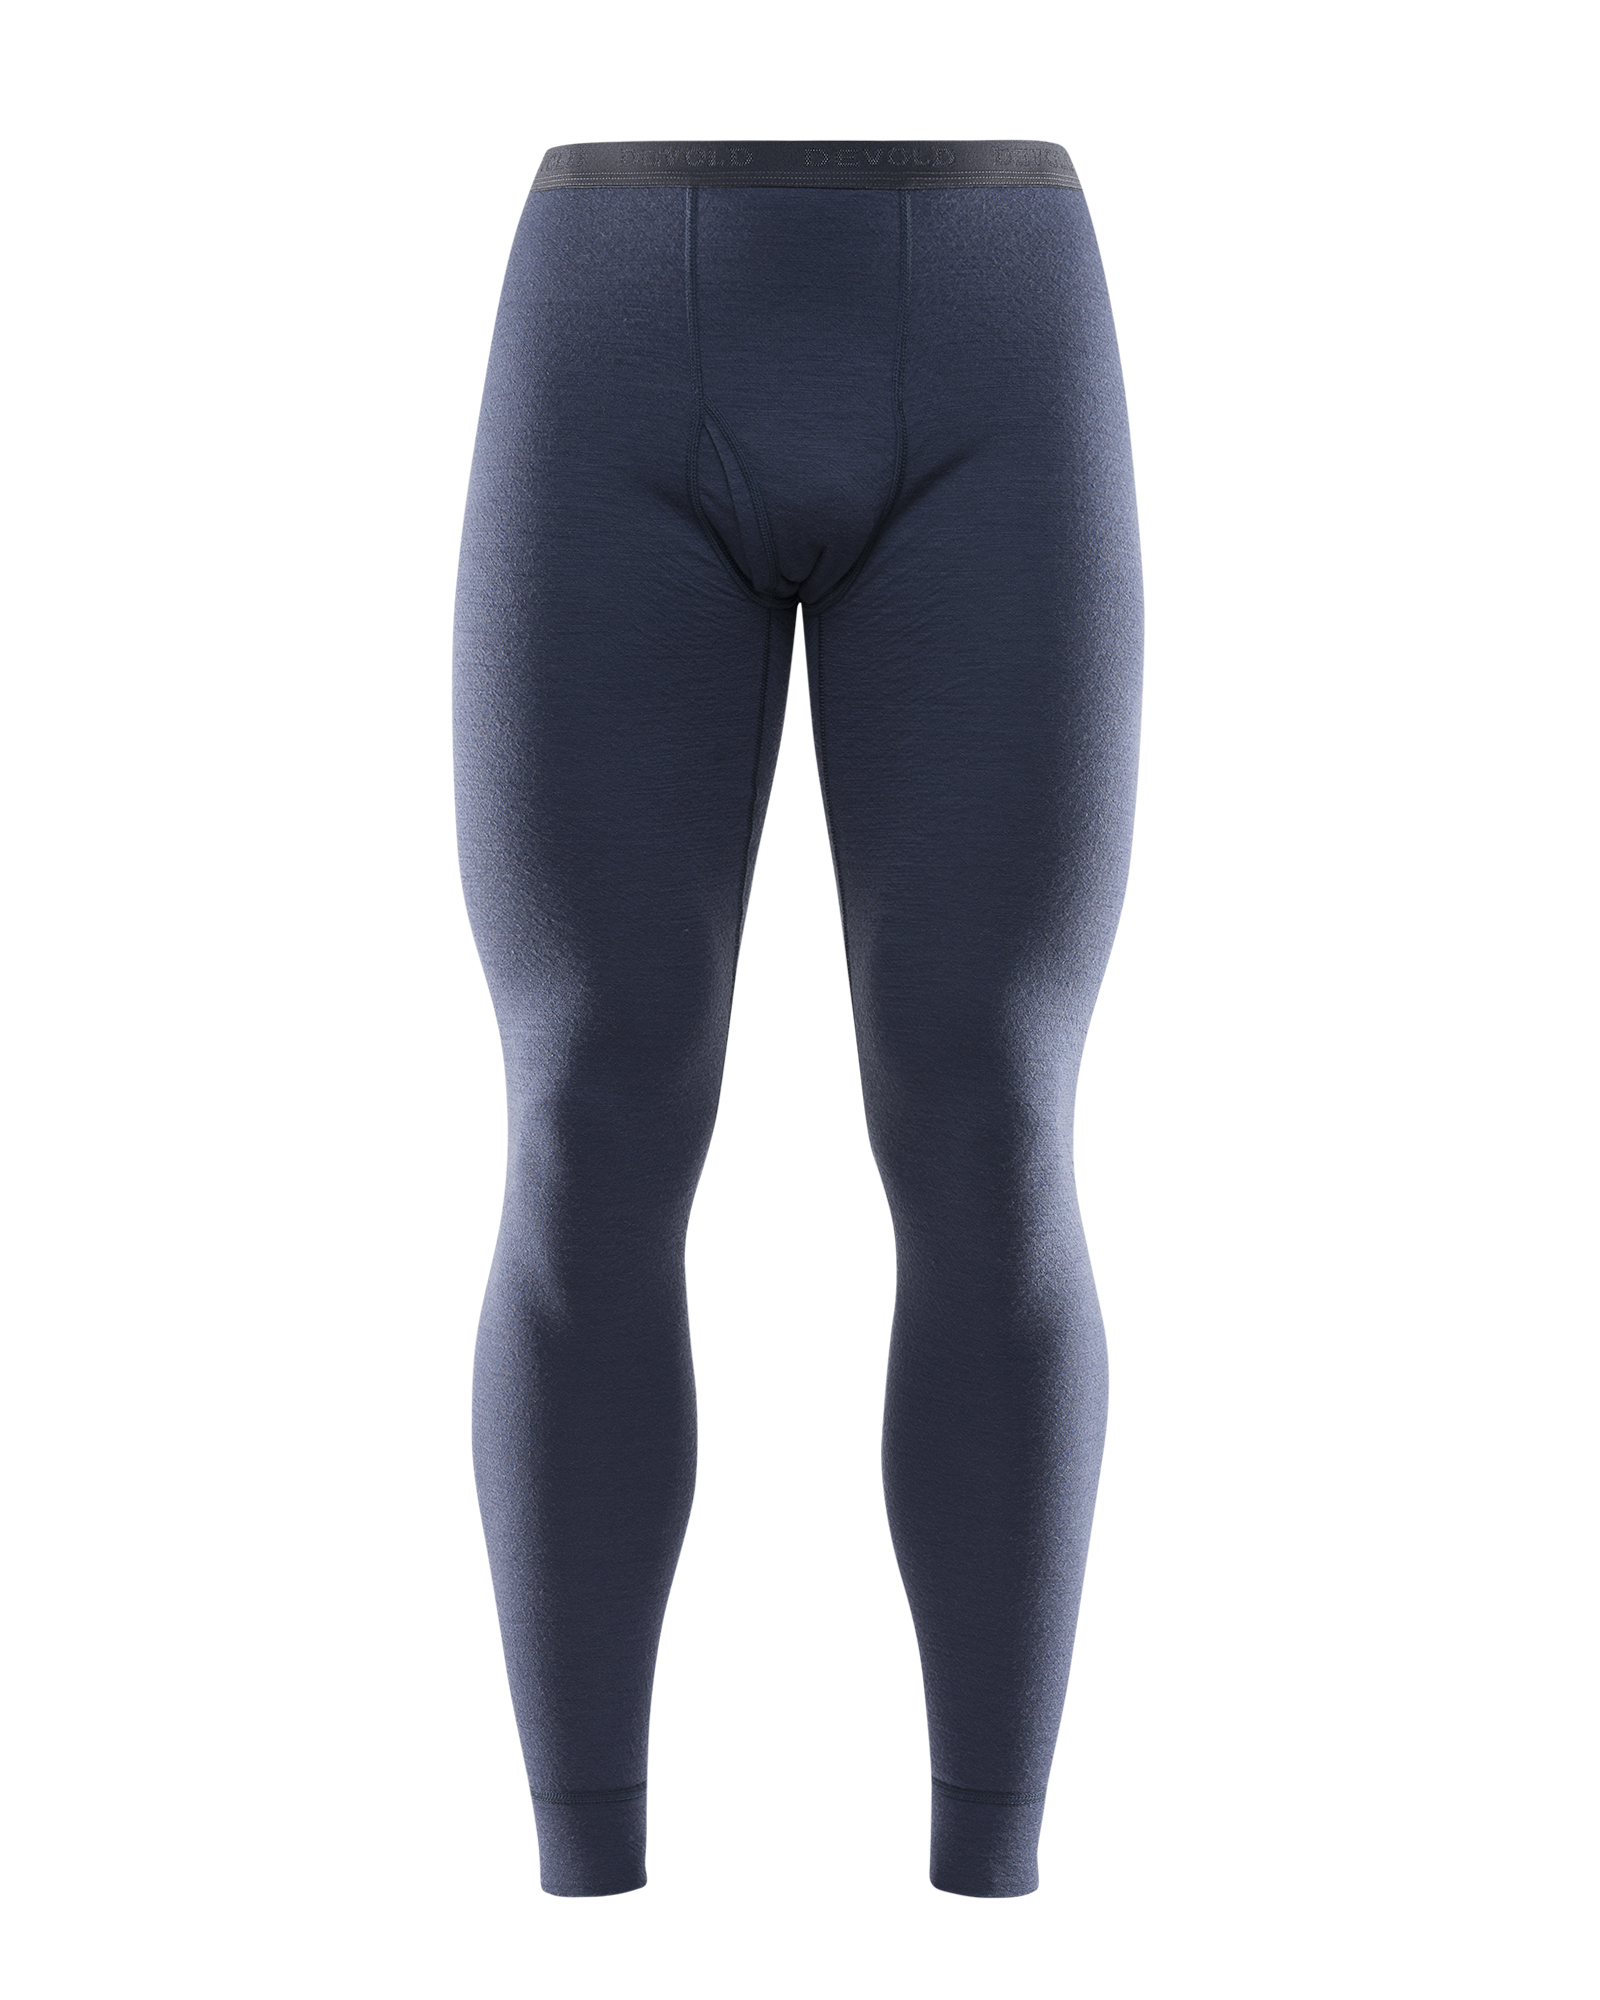 Devold Duo Active Man Long Johns W/fly - Night